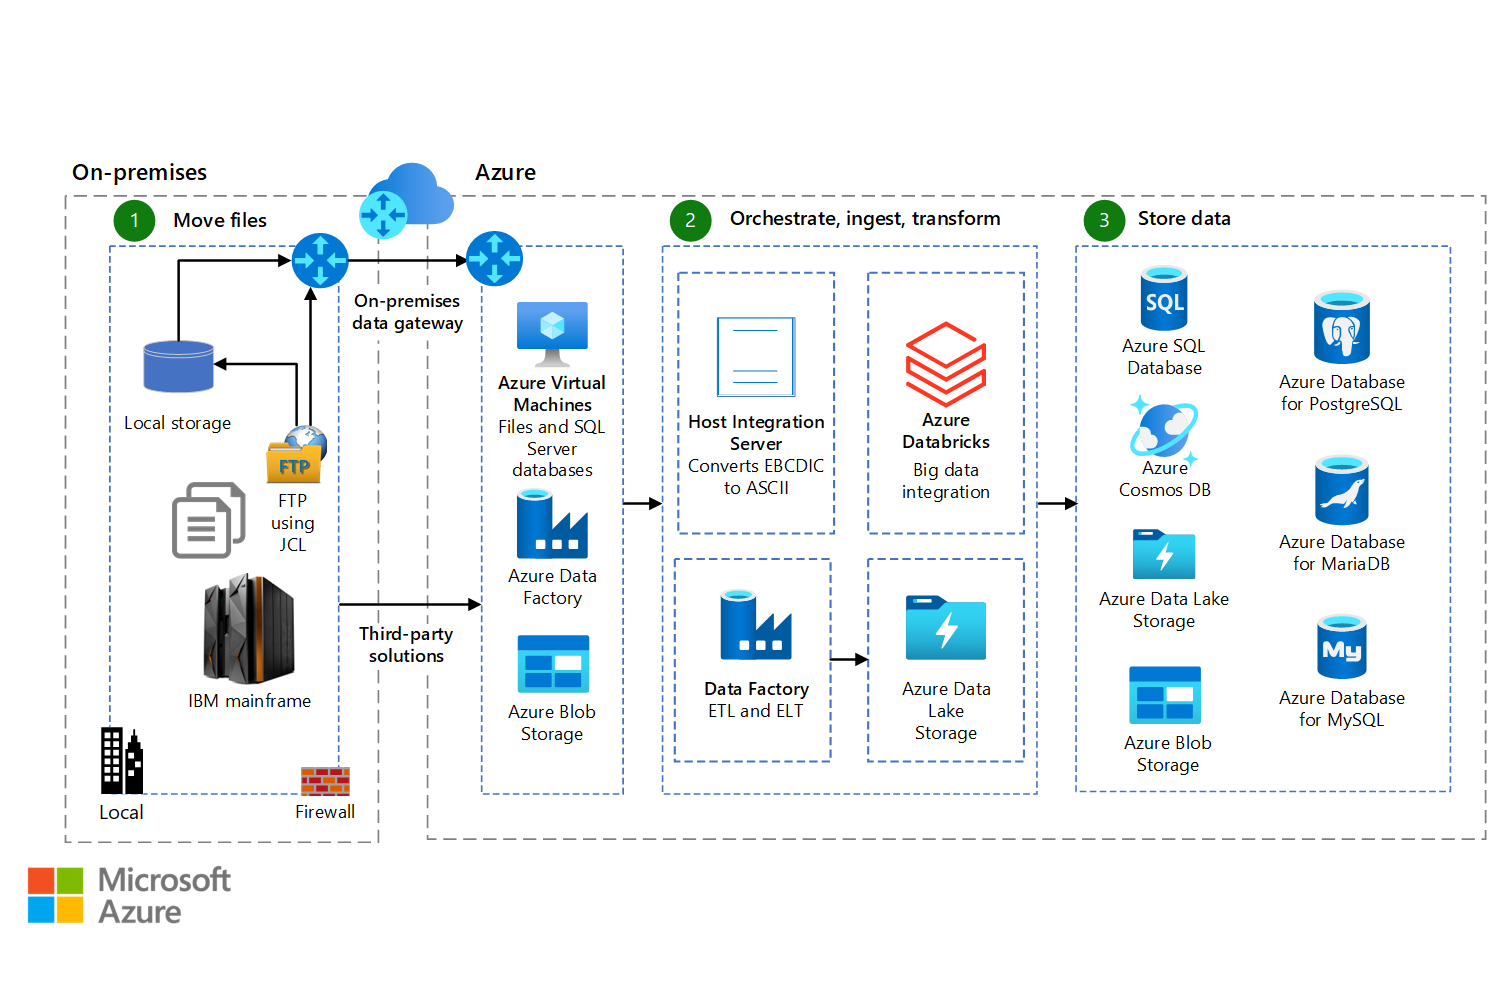 Thumbnail of Mainframe file replication and sync on Azure Architectural Diagram.